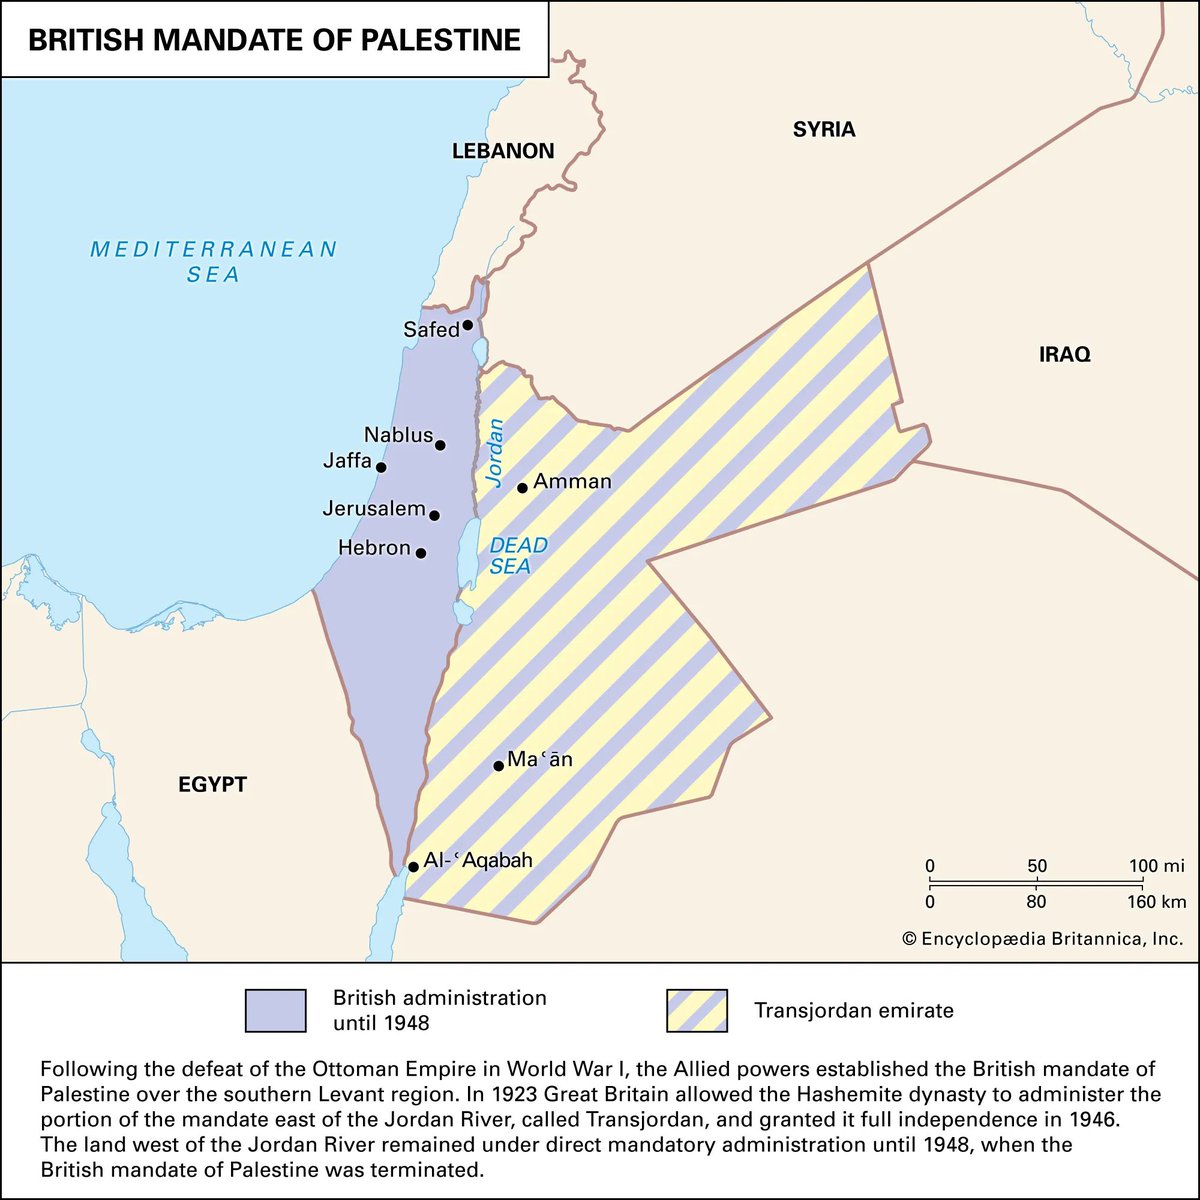 @JohnJuanSean @CynicalPublius @Steve46B @JamesGimpel Also, Transjordan (Hashemite kingdom) was given more of the land when the British Mandate ended...so, after Jordan accepted thousands of Pa-lie-stinian refugees in 1967, they repaid their hosts by trying to overthrow the monarchy and take over Jordan.